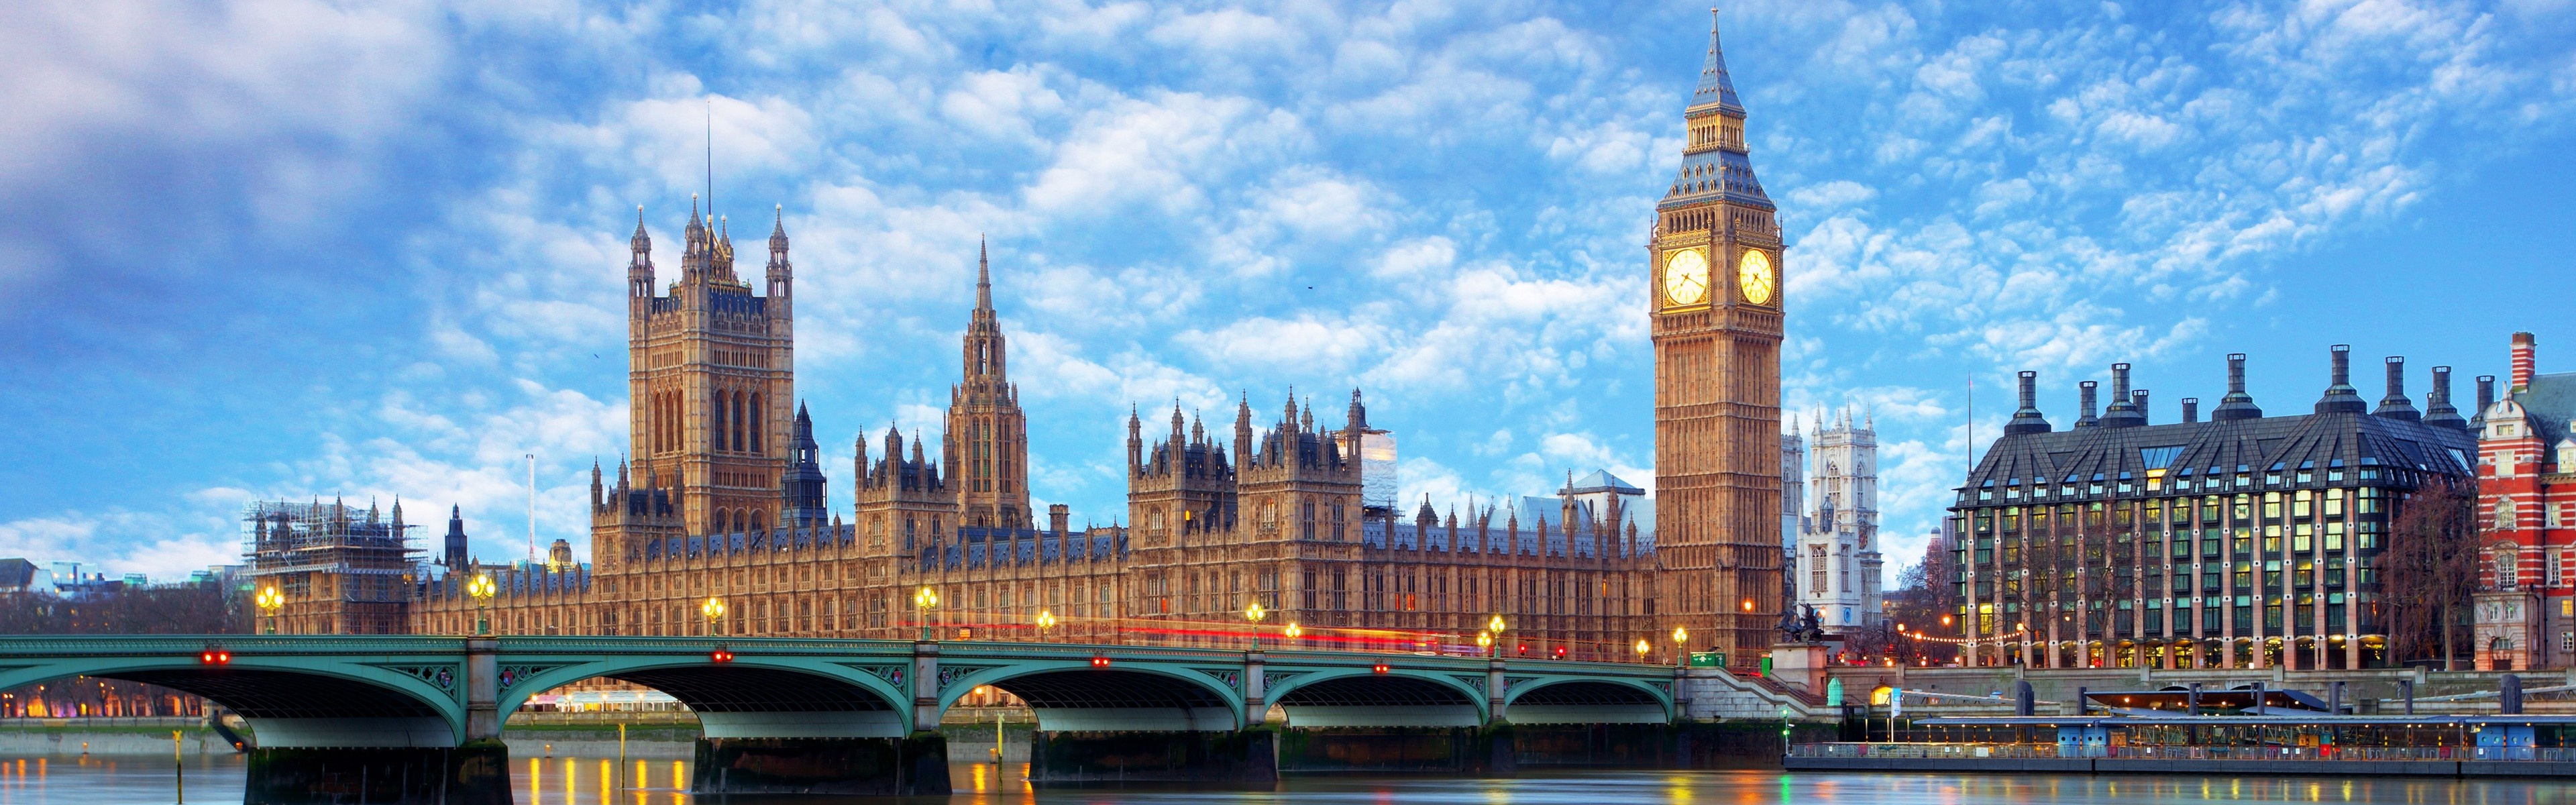 Cityscape: The Palace of Westminster,The Houses of Parliament, Big Ben, London, England. 3840x1200 Dual Screen Background.